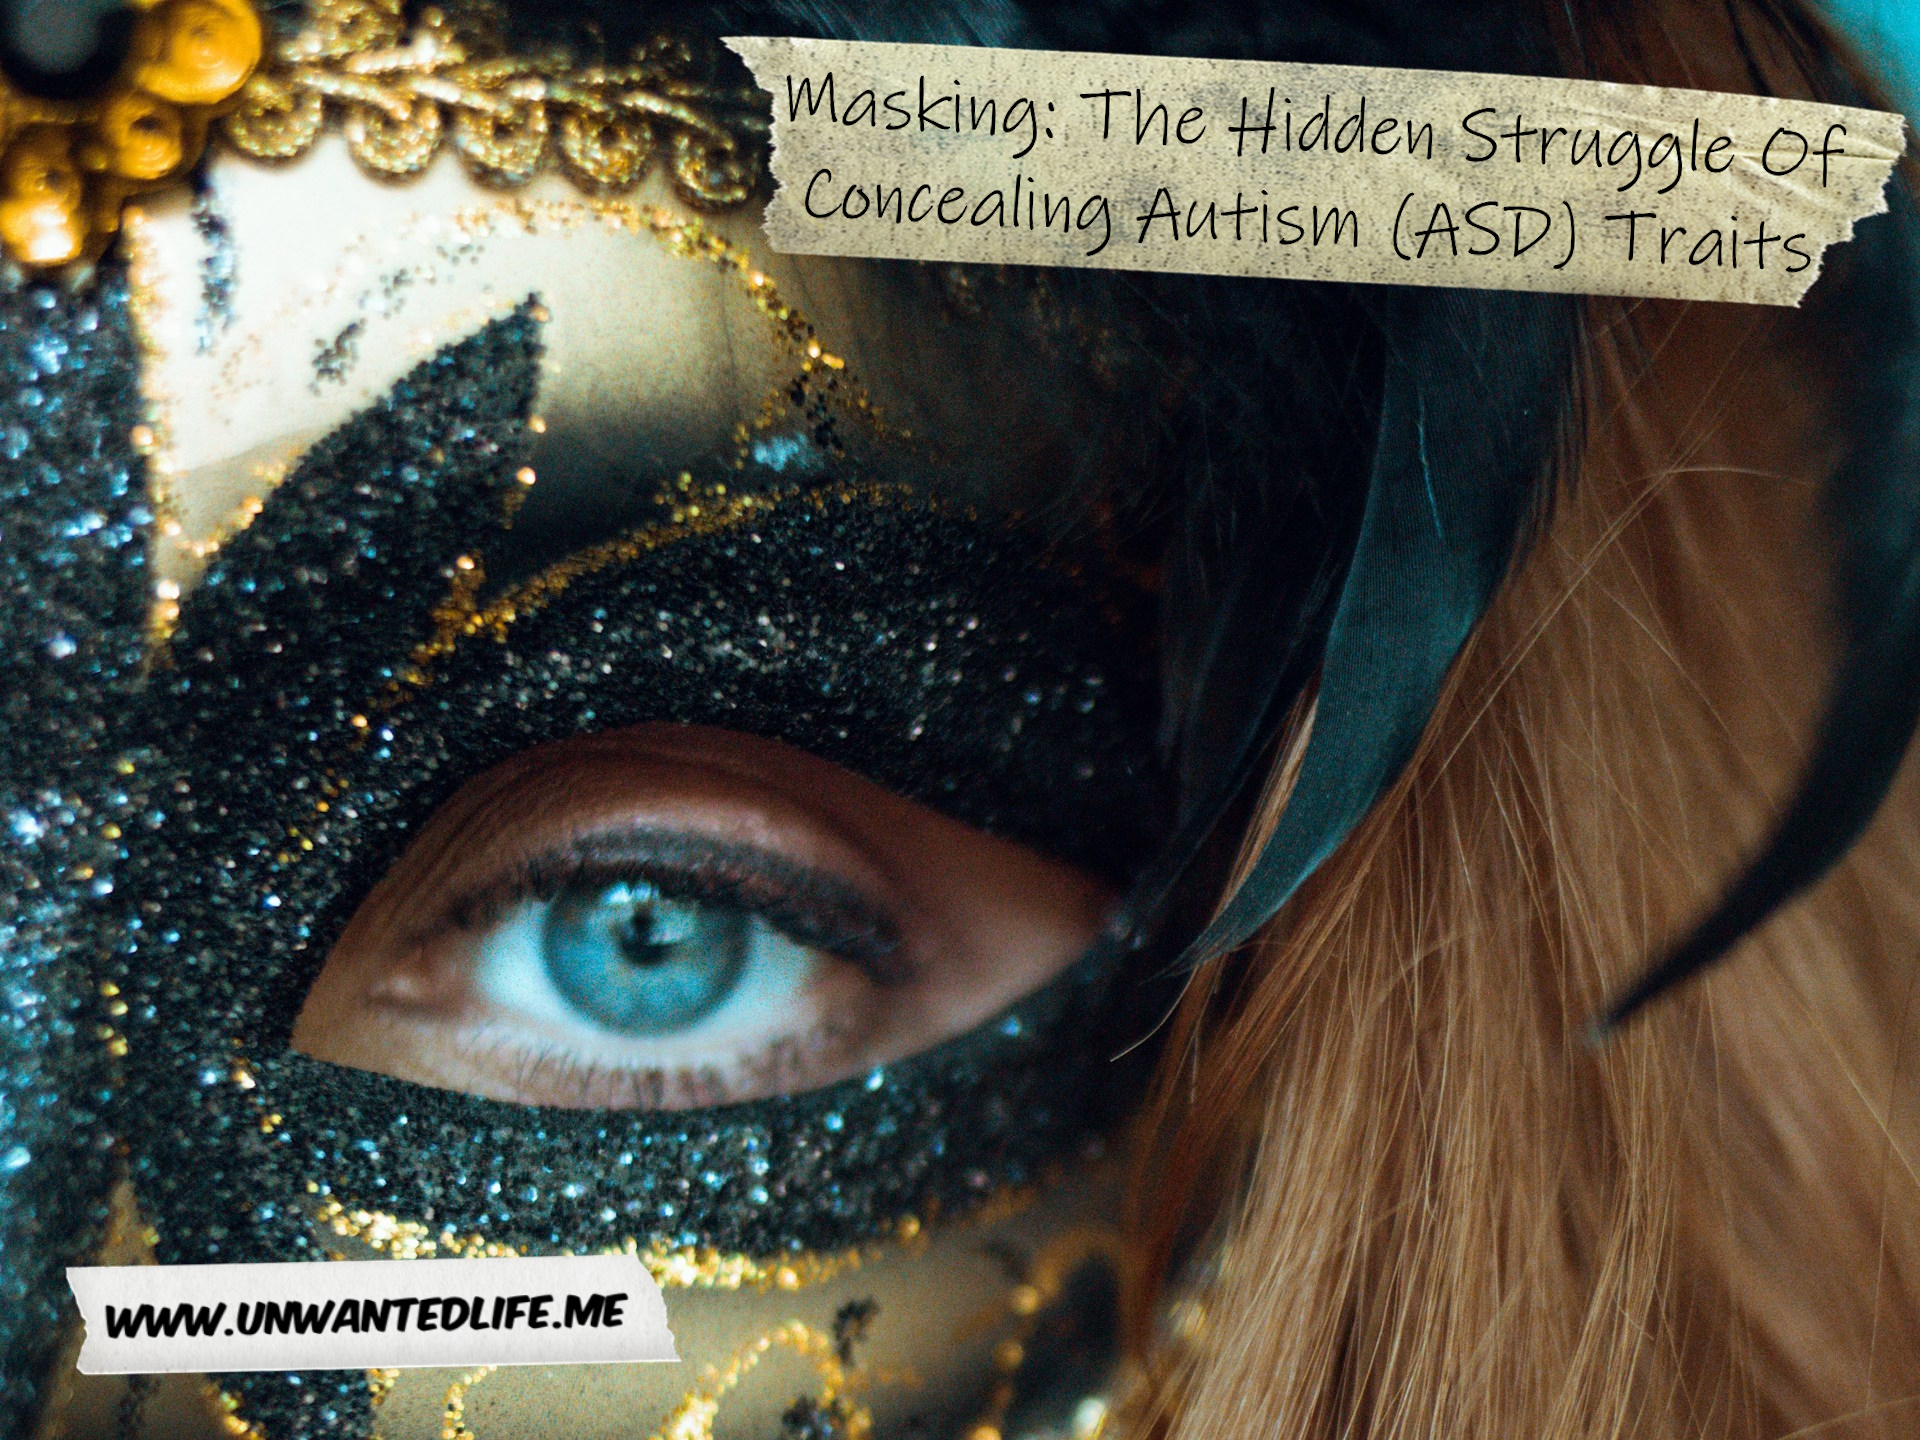 A photo of a White woman wearing an elaborate mask to represent the topic of the article - Masking: The Hidden Struggle Of Concealing Autism (ASD) Traits